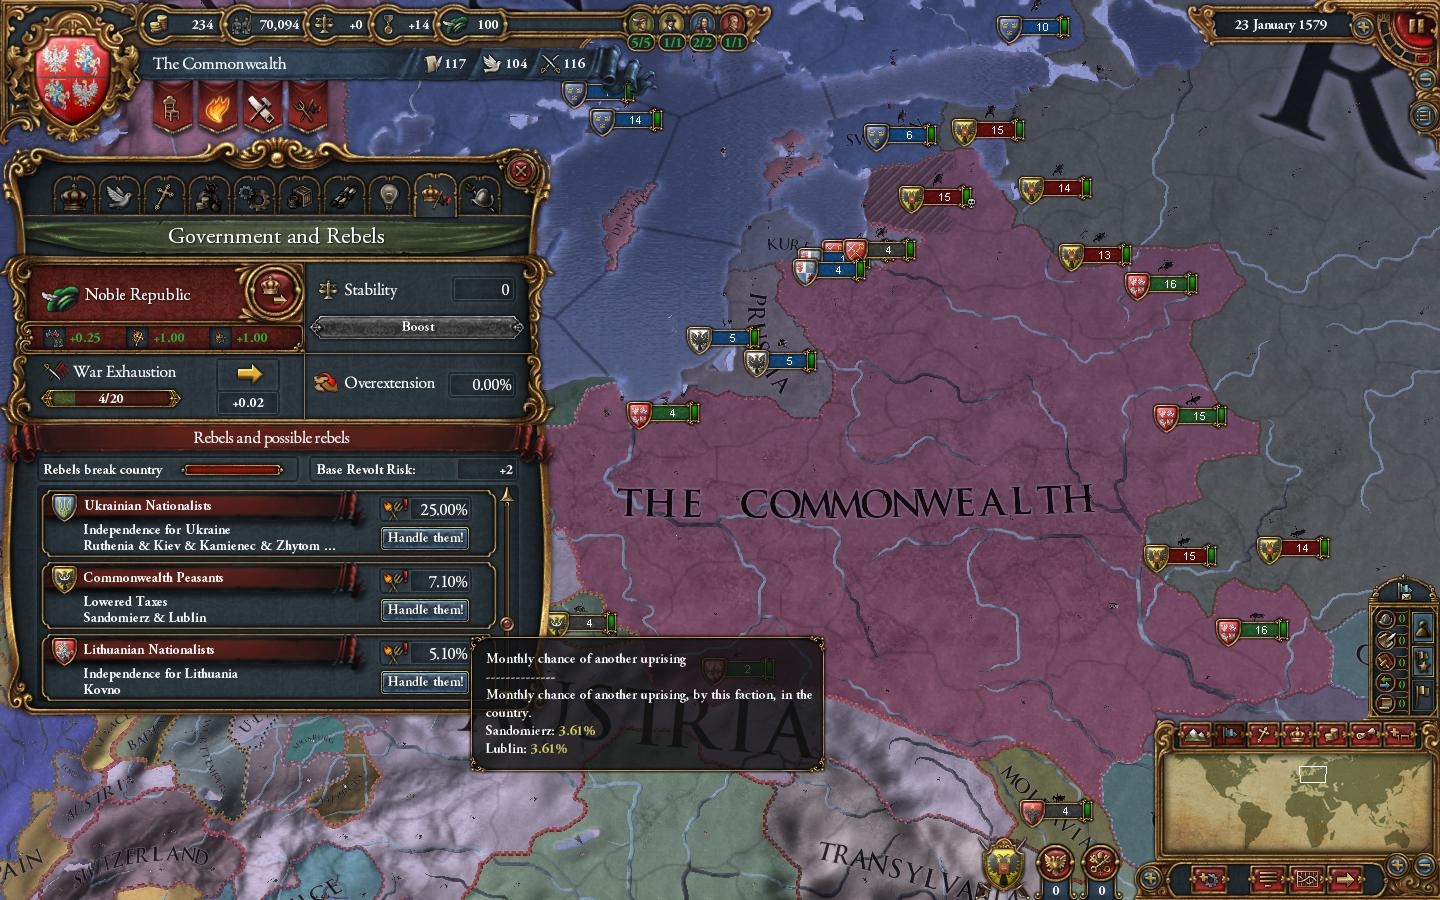 Europa Universalis Iv Wallpapers Video Game Hq Europa Images, Photos, Reviews